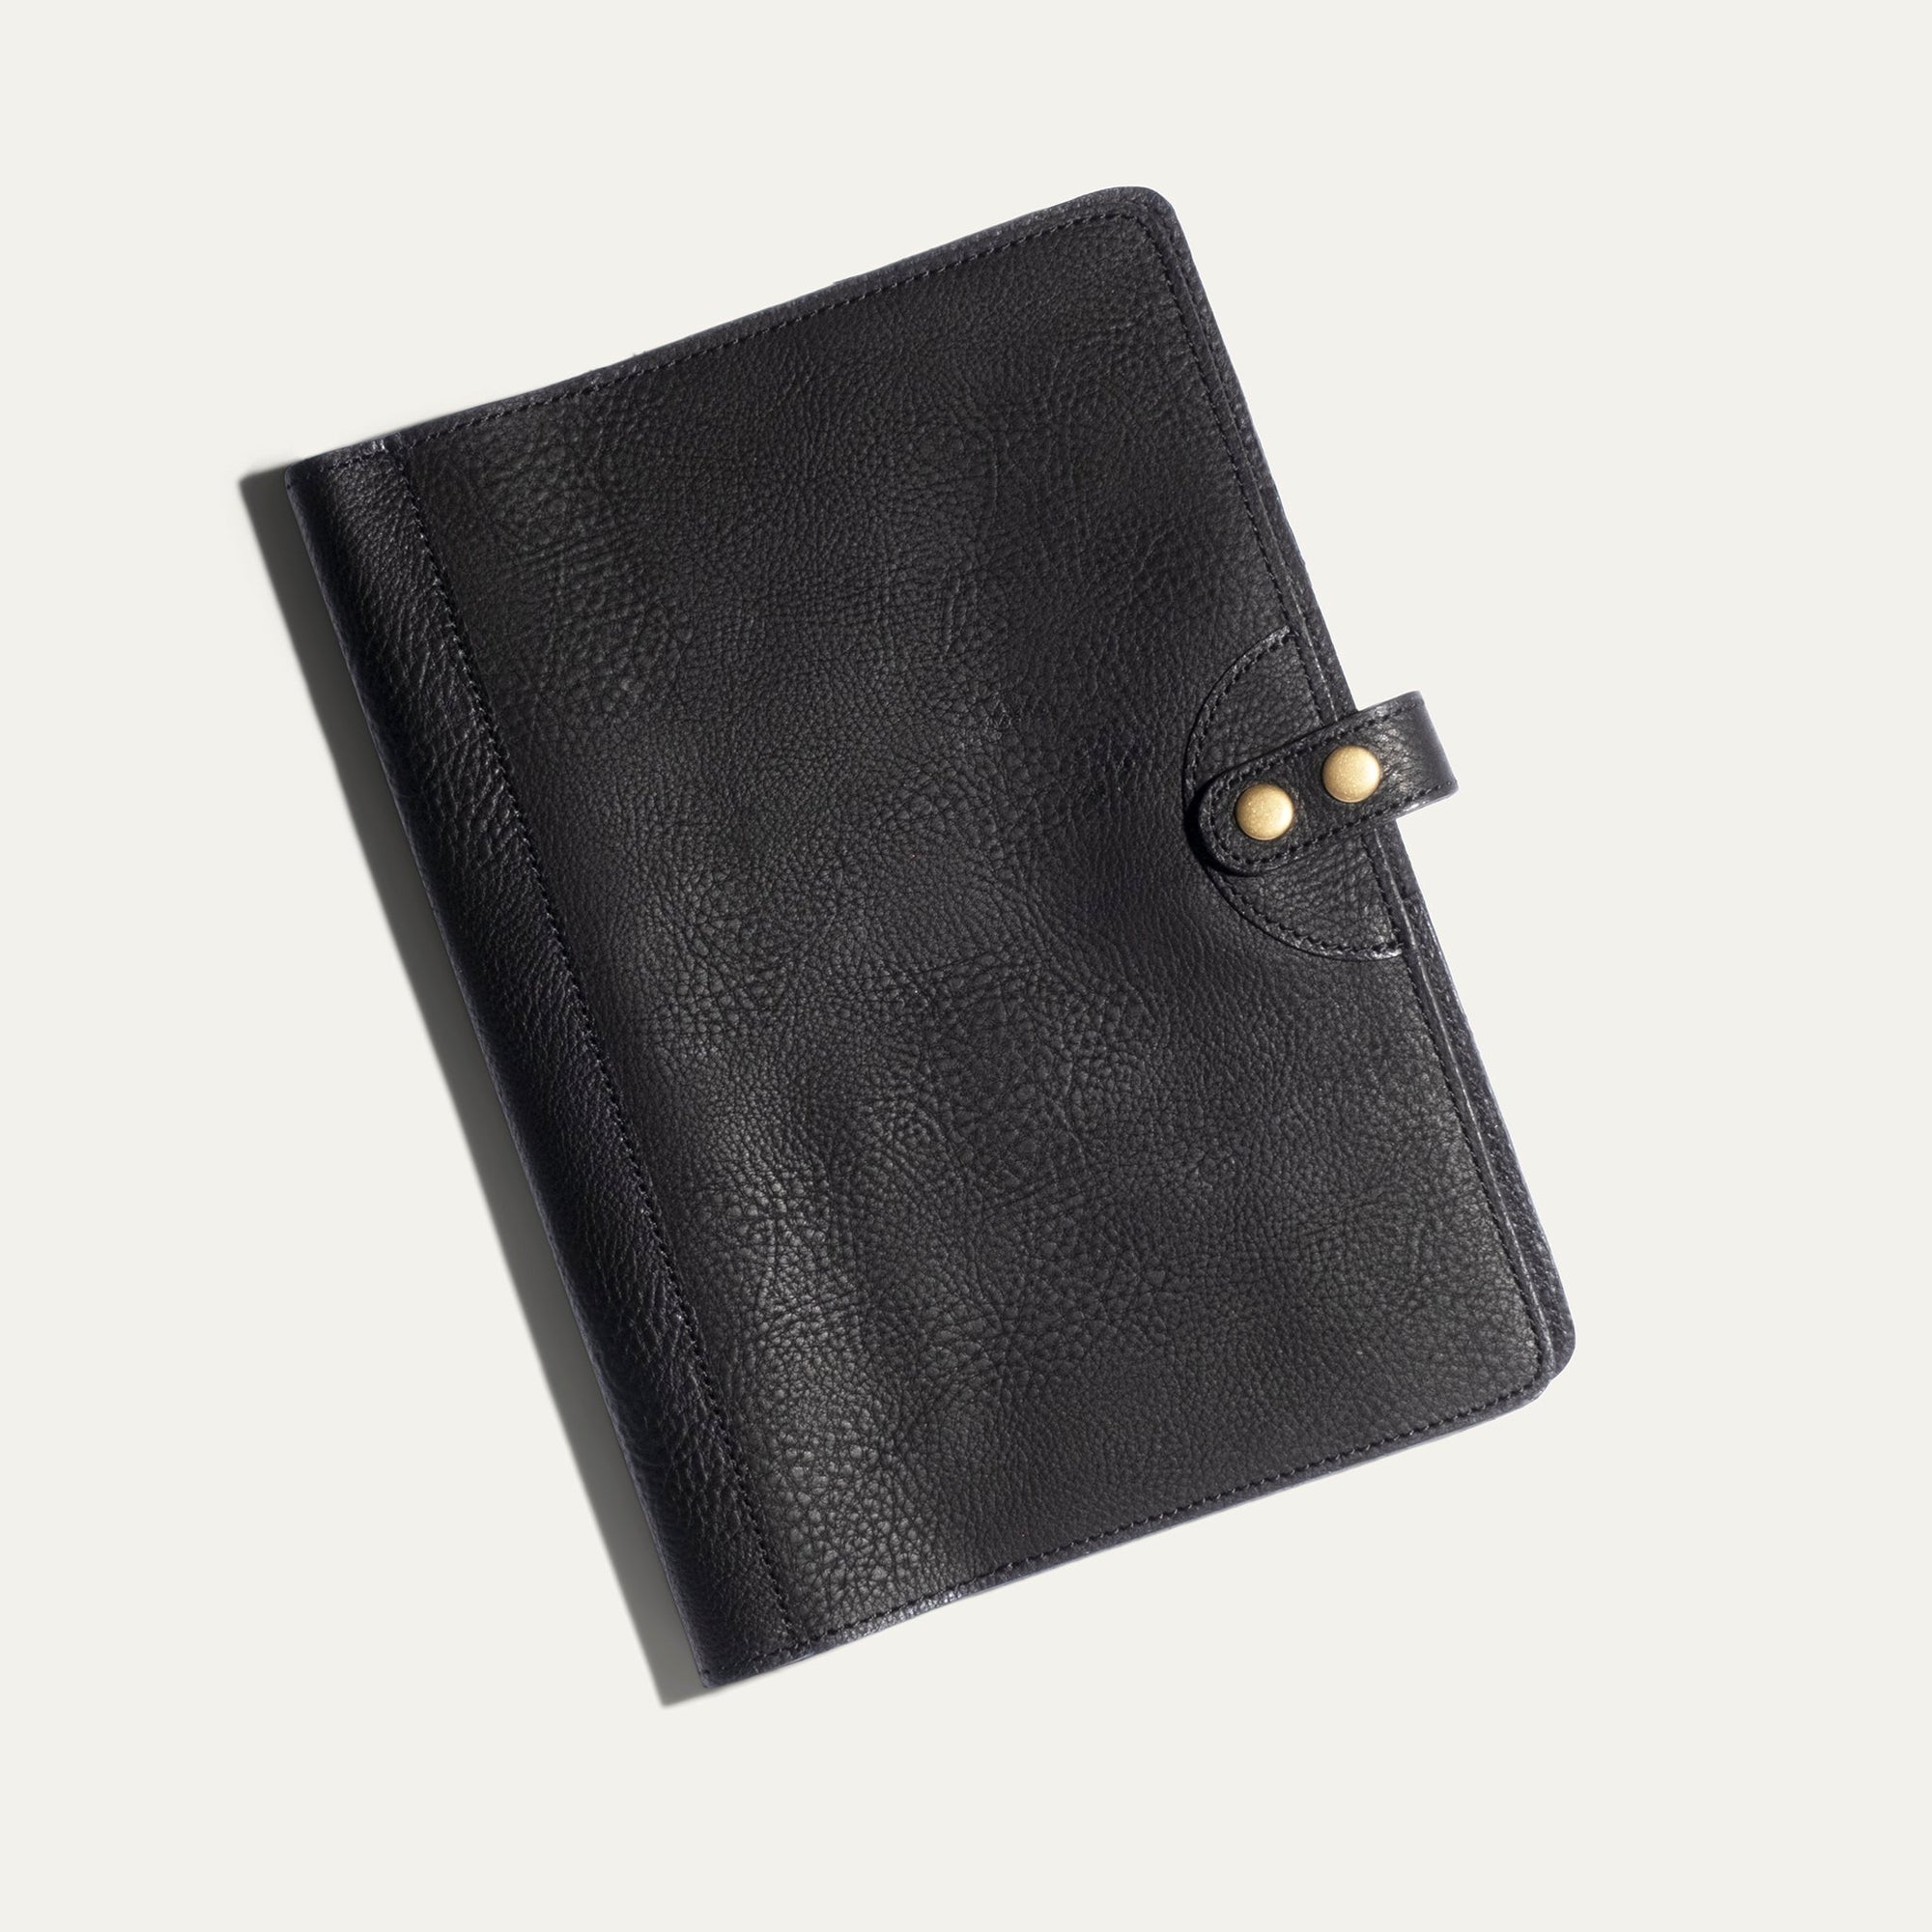 Large Signature Leather Journal Cover in Black by Will Leather Goods